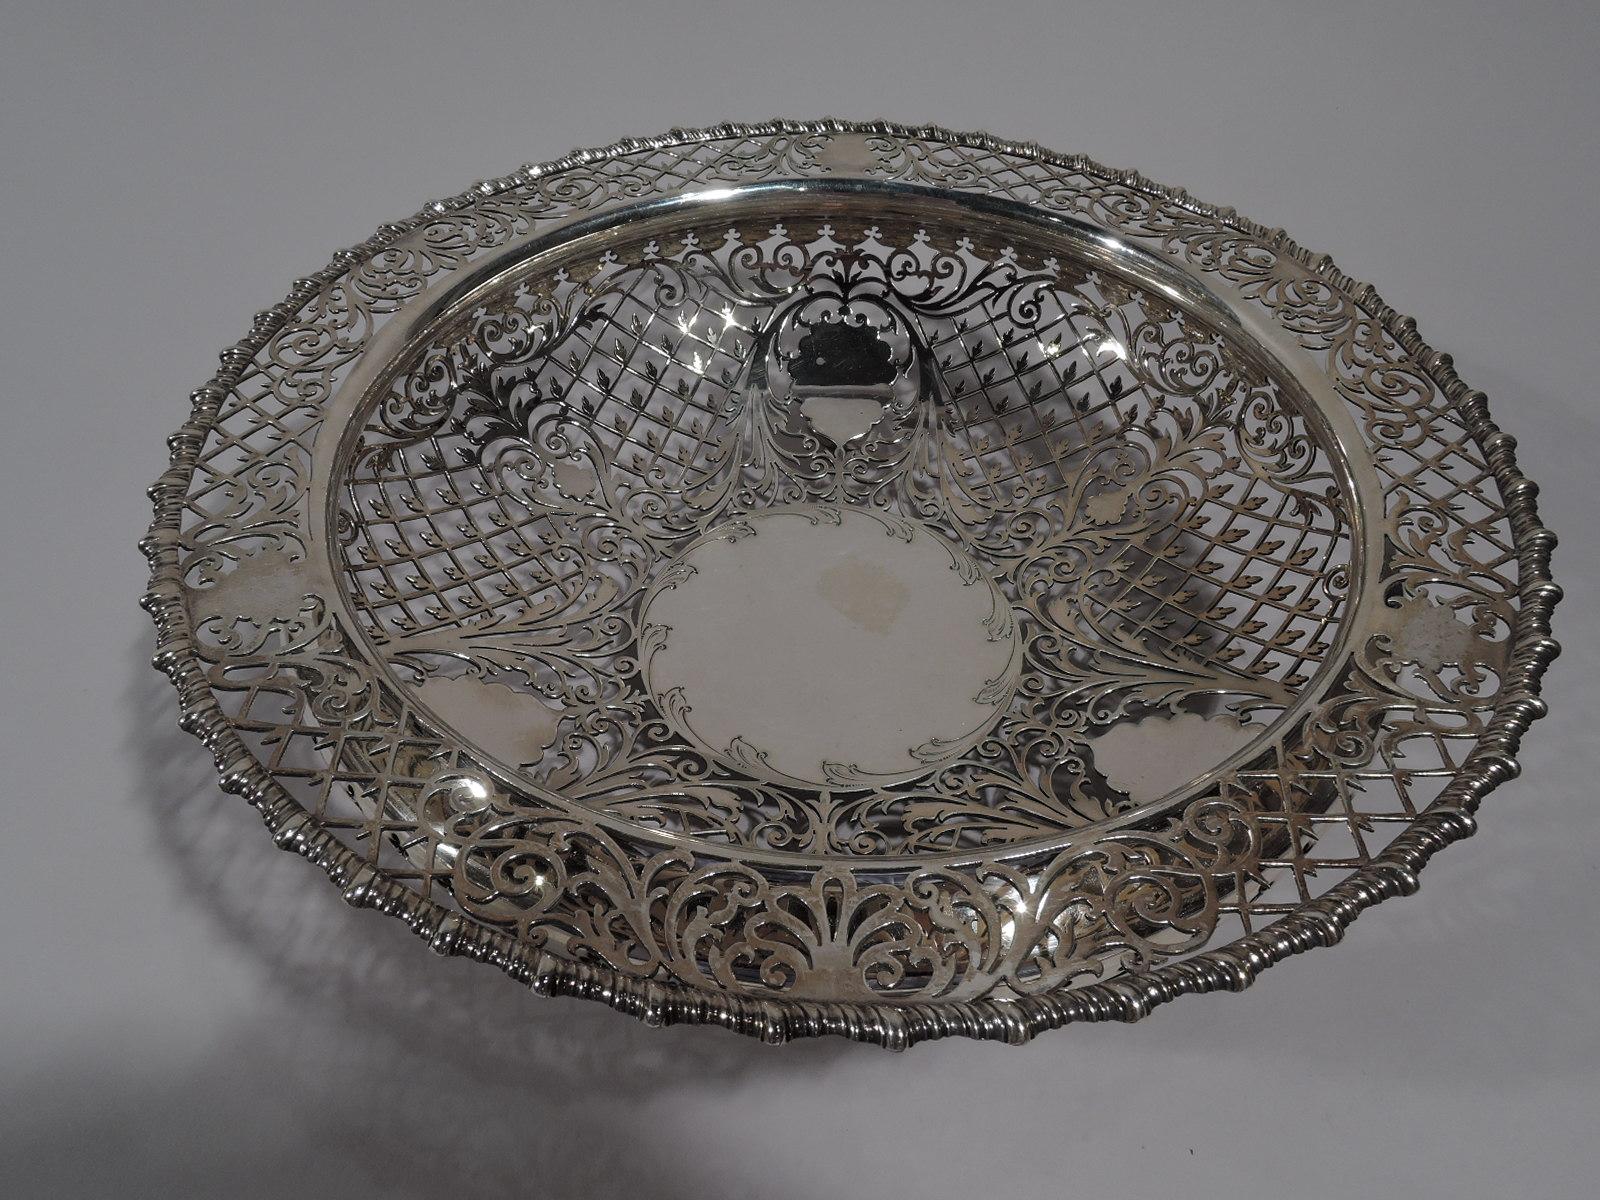 Edwardian sterling silver bowl. Made by James Dixon & Sons in Sheffield in 1904. Bellied with flat shoulder and gadrooned rim. Solid circular well (vacant) surrounded by 3 multifoil frames (vacant) set between leafy scrolls. All-over open diaper